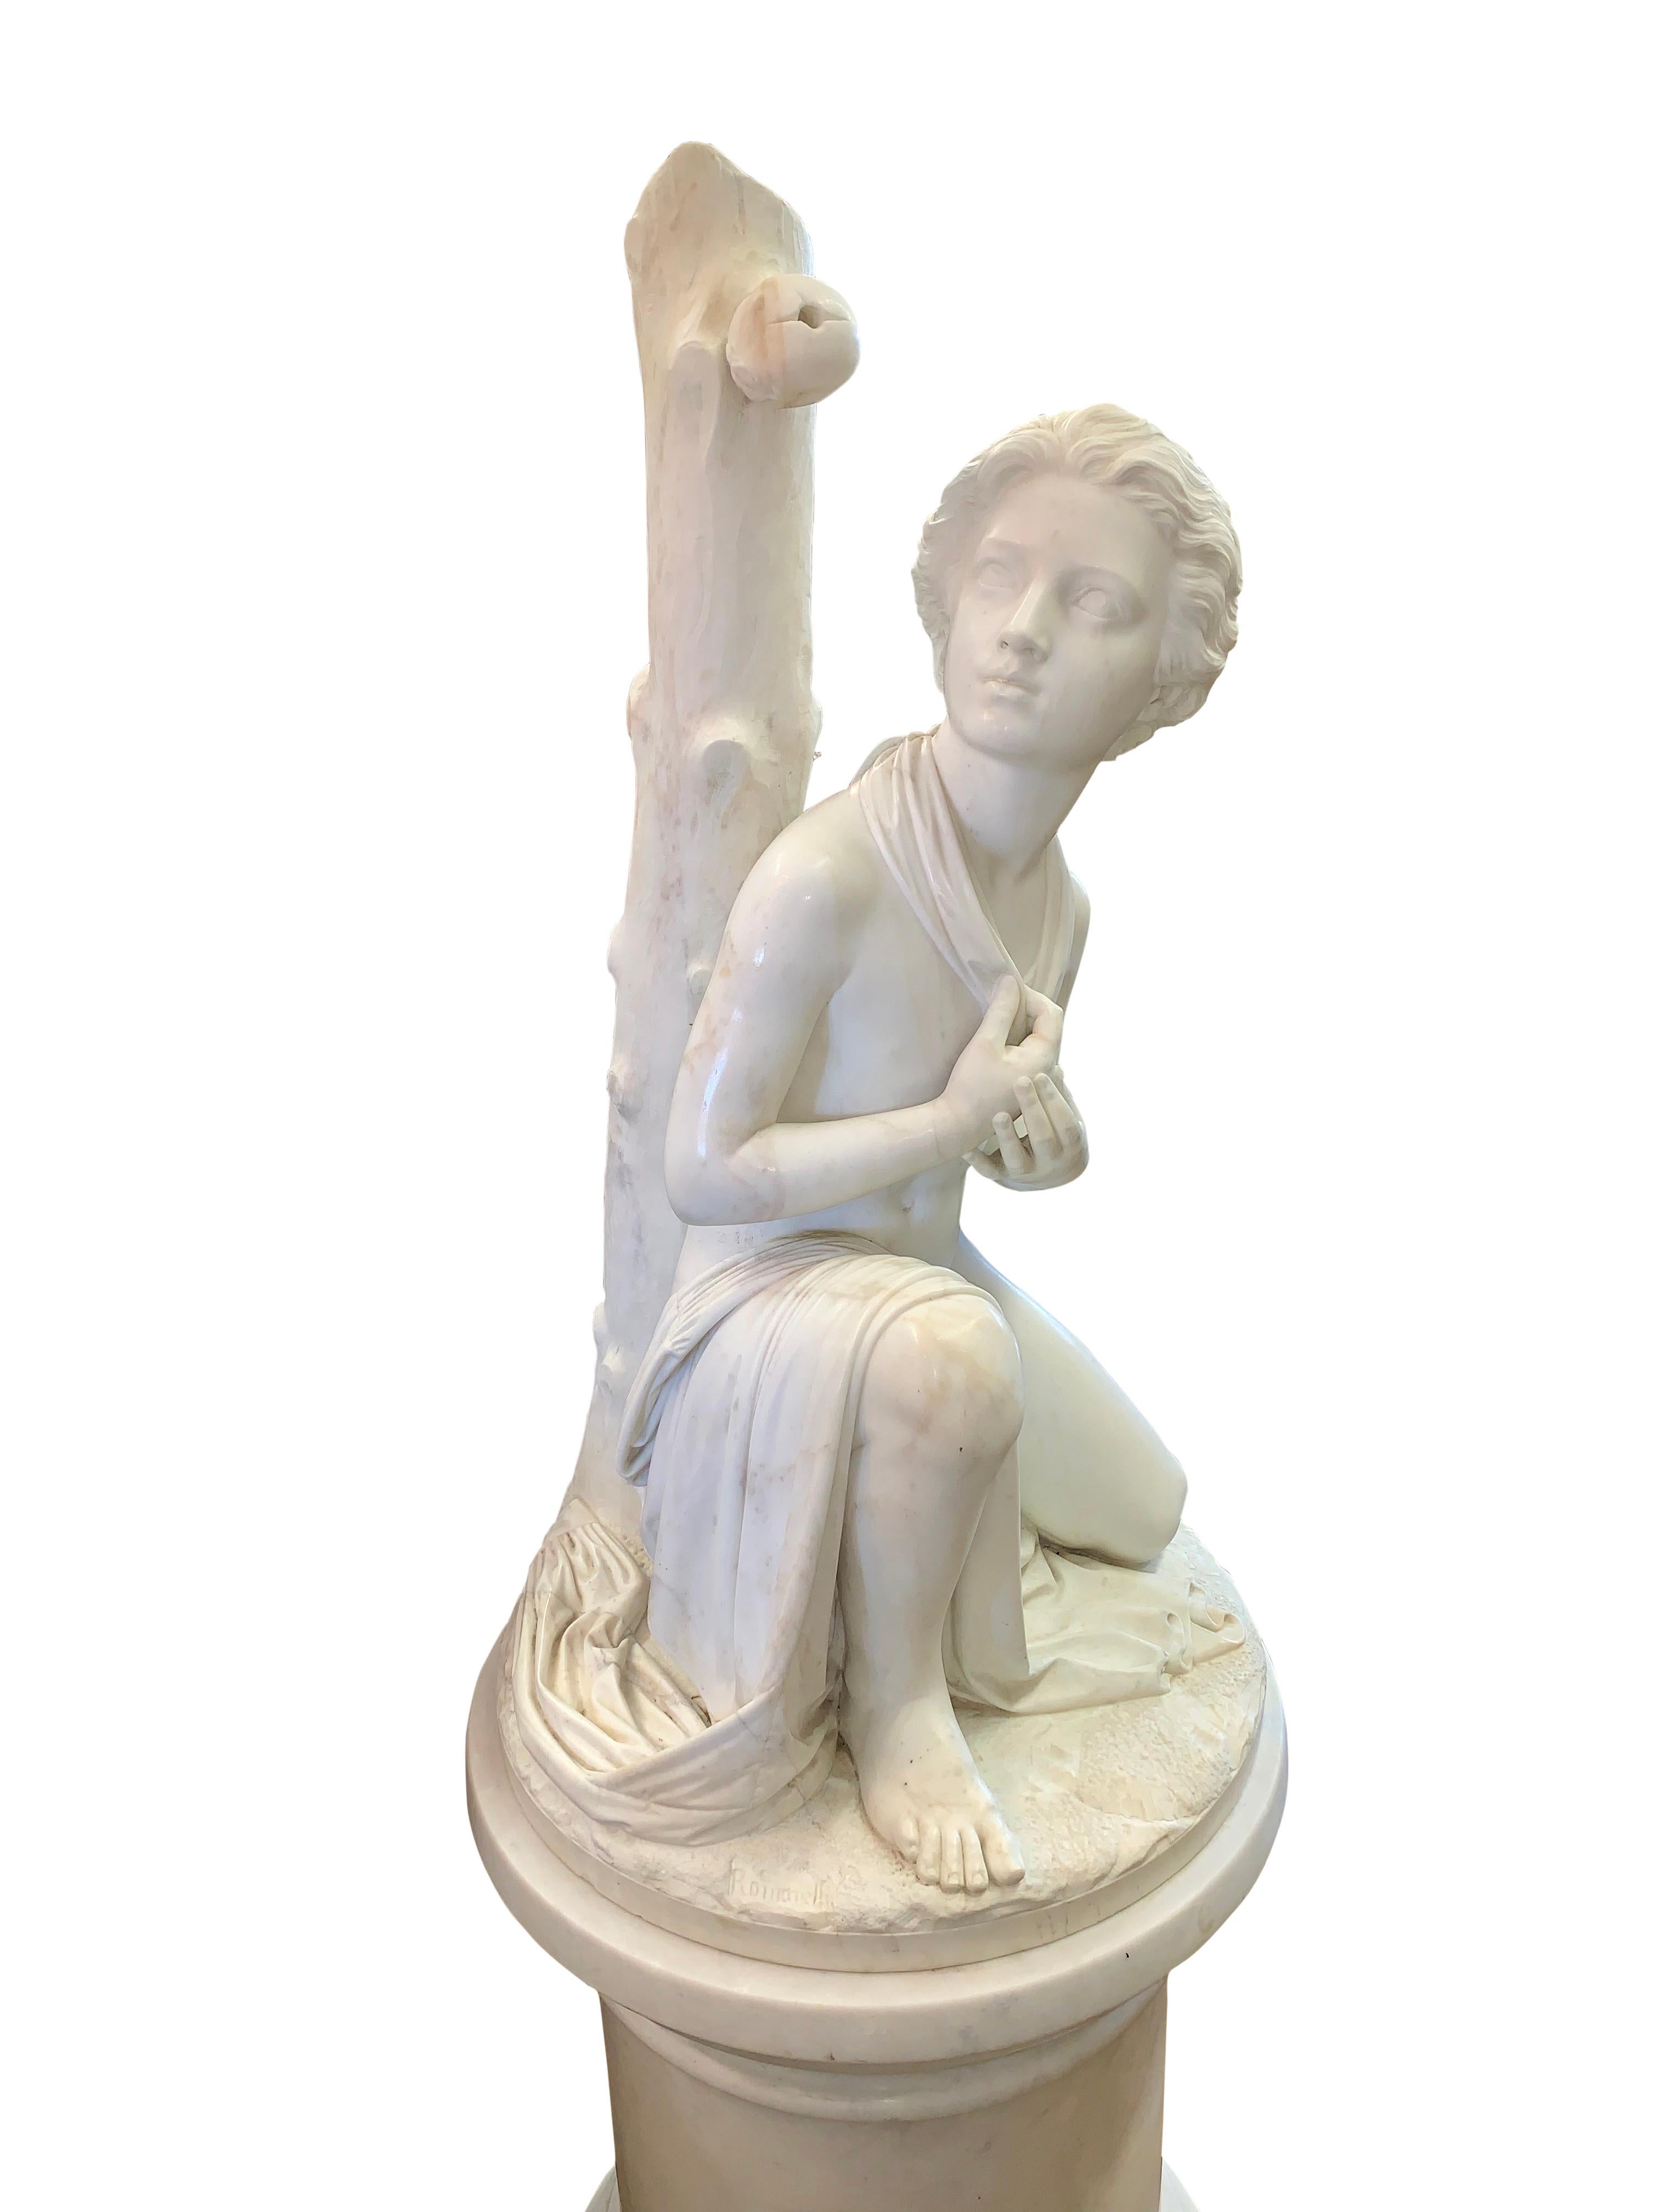 A magnificent 19th century Italian carved marble figure of the son of William Tell kneeling under a tree trunk with a punched apple above his head. Raised on a contemporary solid marble pedestal.
By Pasquale Romanelli (1812-1887) 
This model is